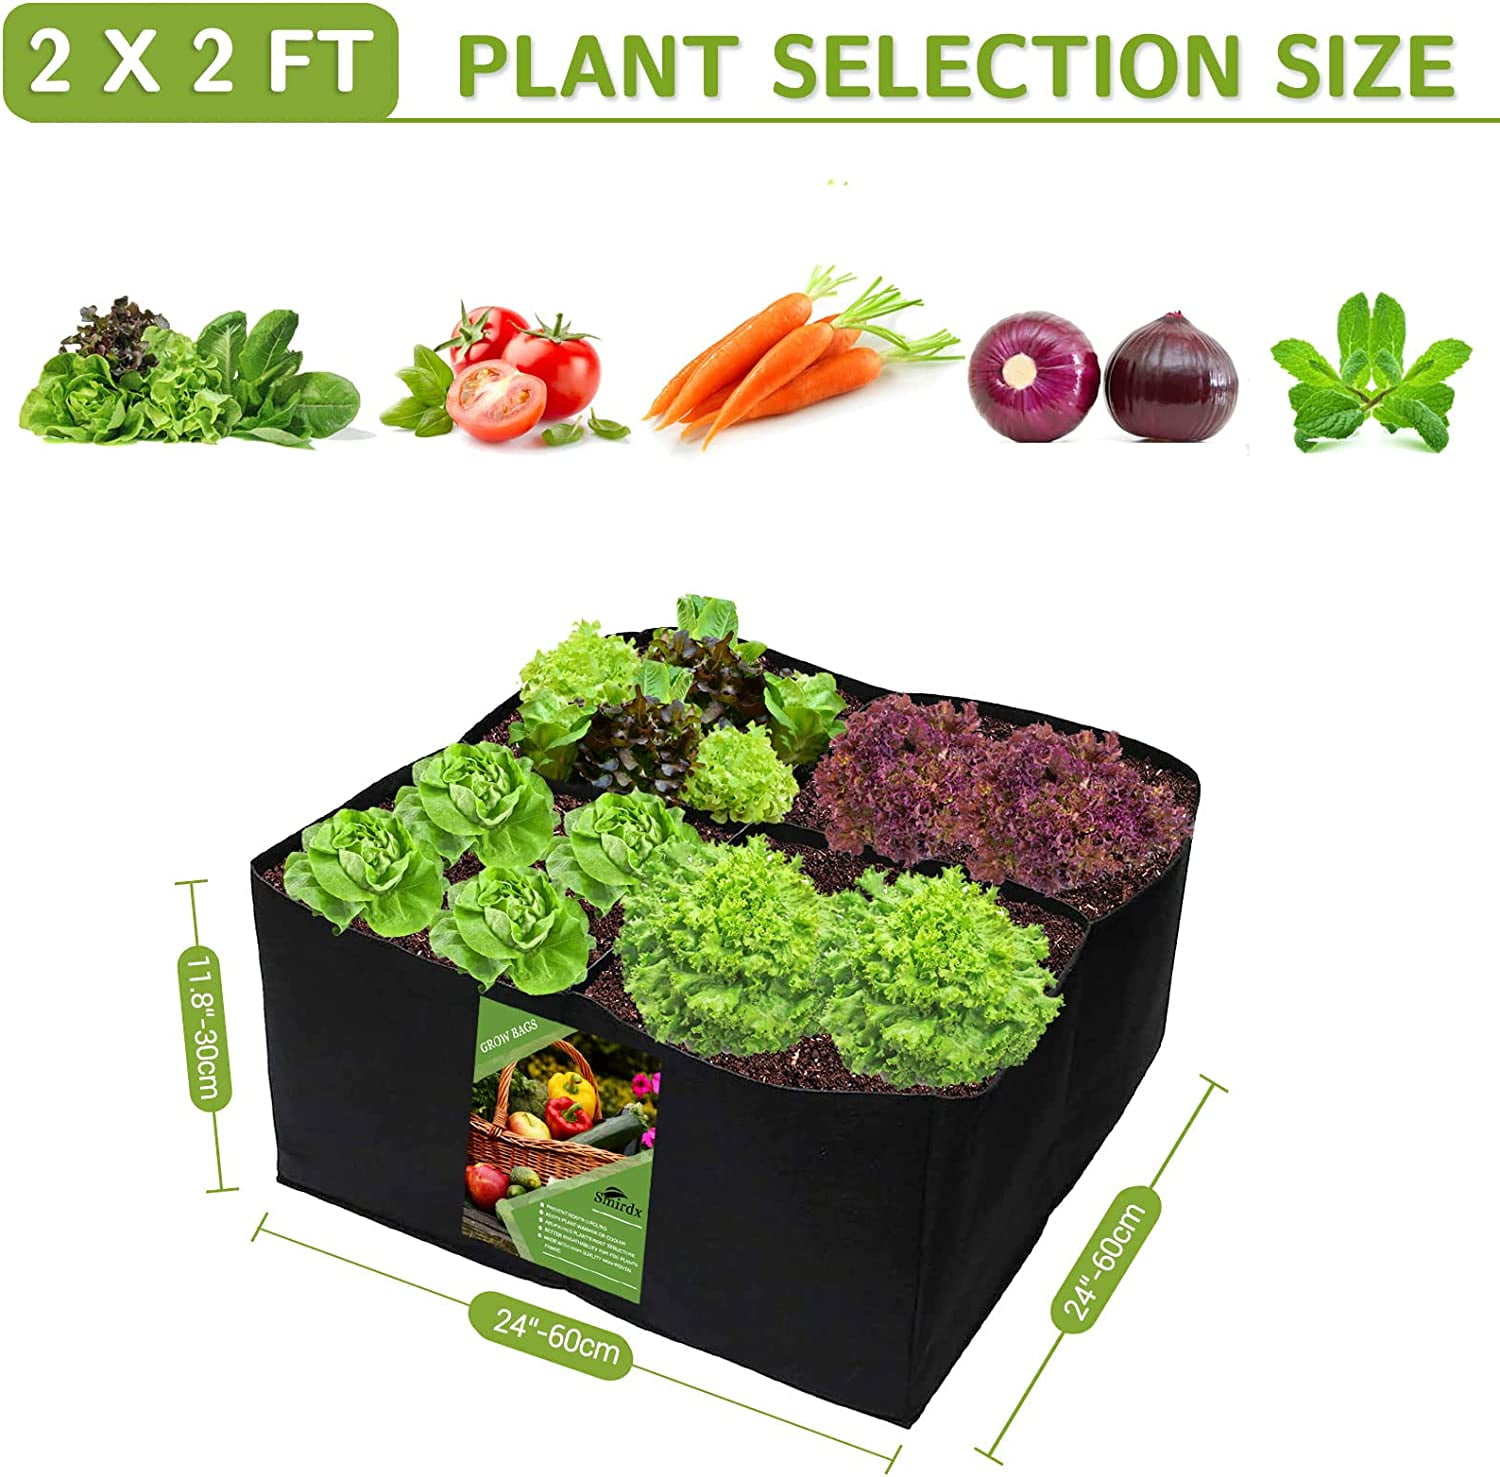 Fabric Raised Garden Bed Square Plant Grow Bags Rectangular Planting  Container 8 Grids Black 60 gal 1PCS